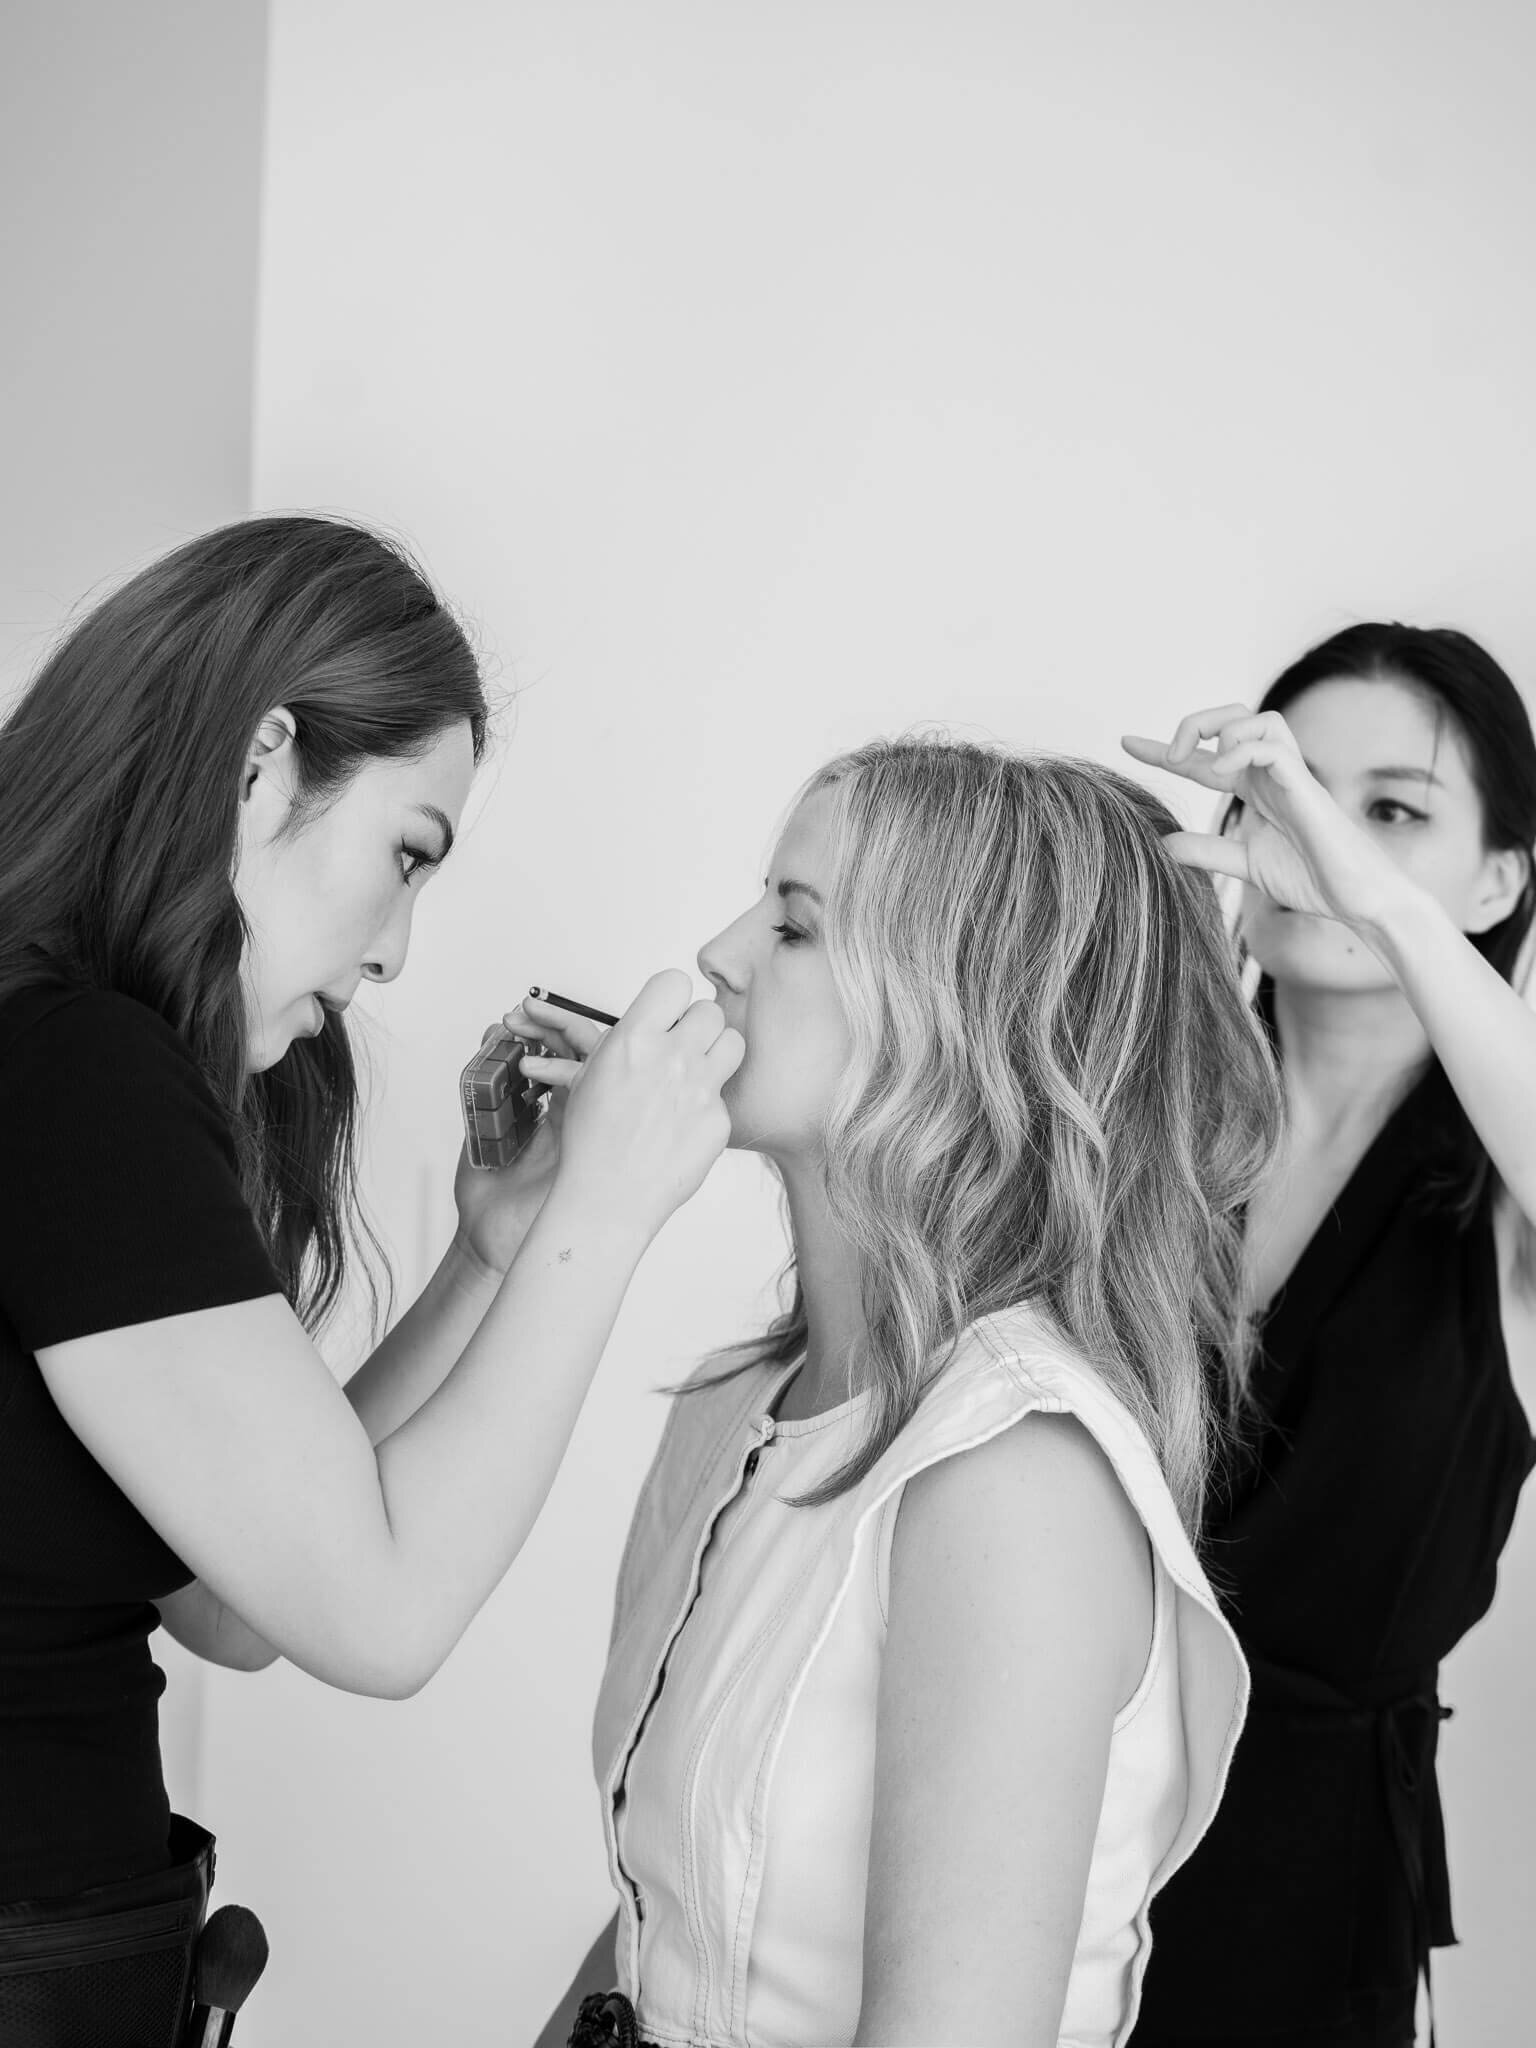 Two artists doing hair and makeup